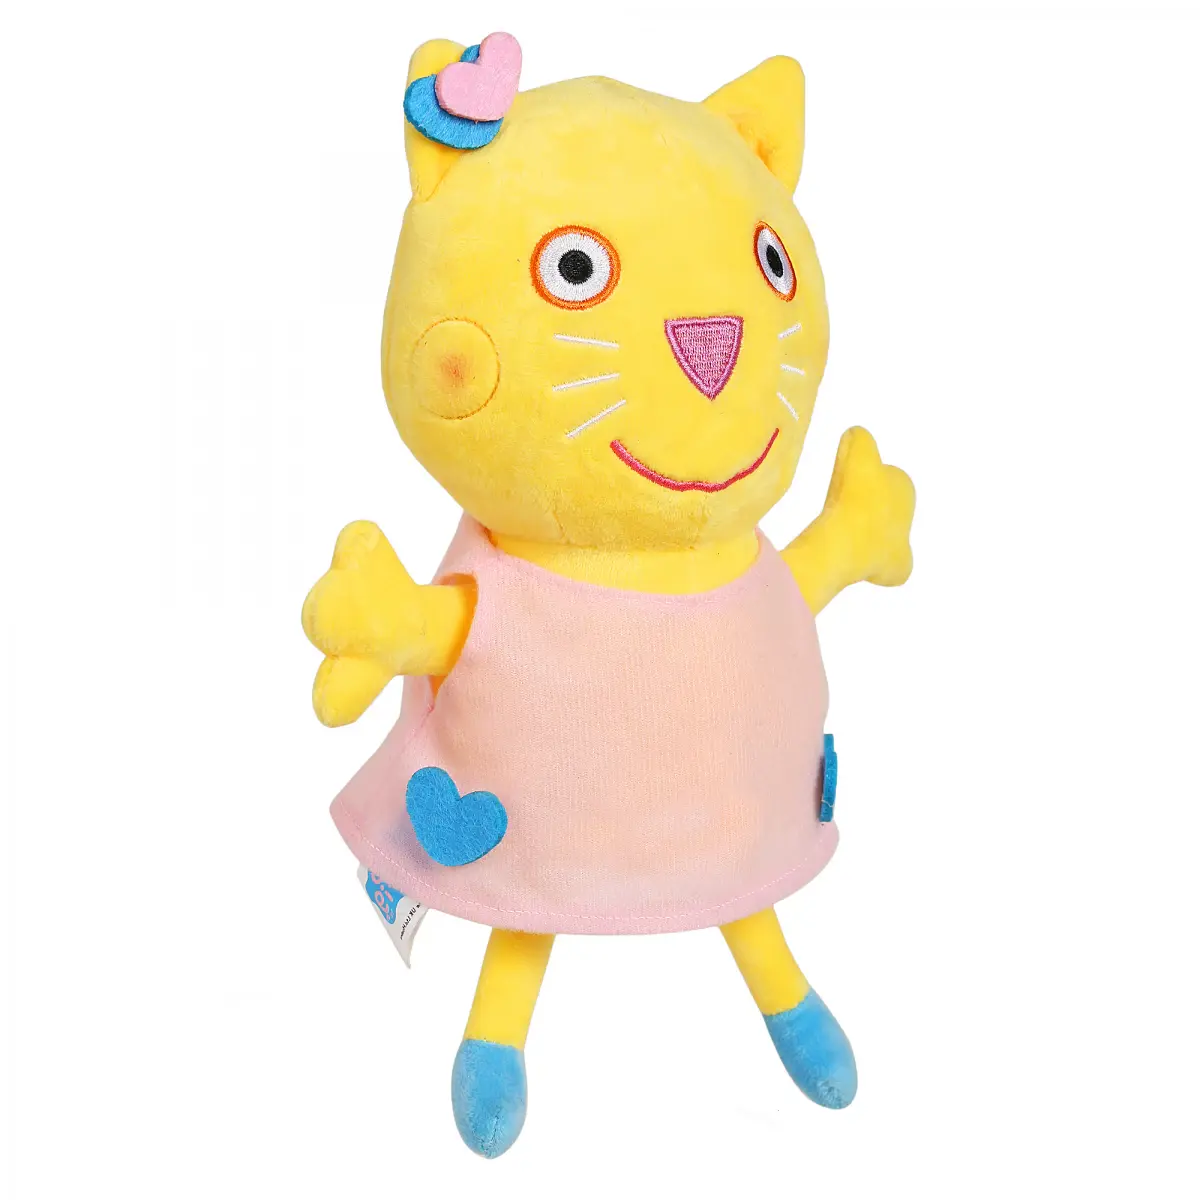 Peppa Pig Candy Cat Soft Toy for Kids, 30cm, 18M+, Multicolour